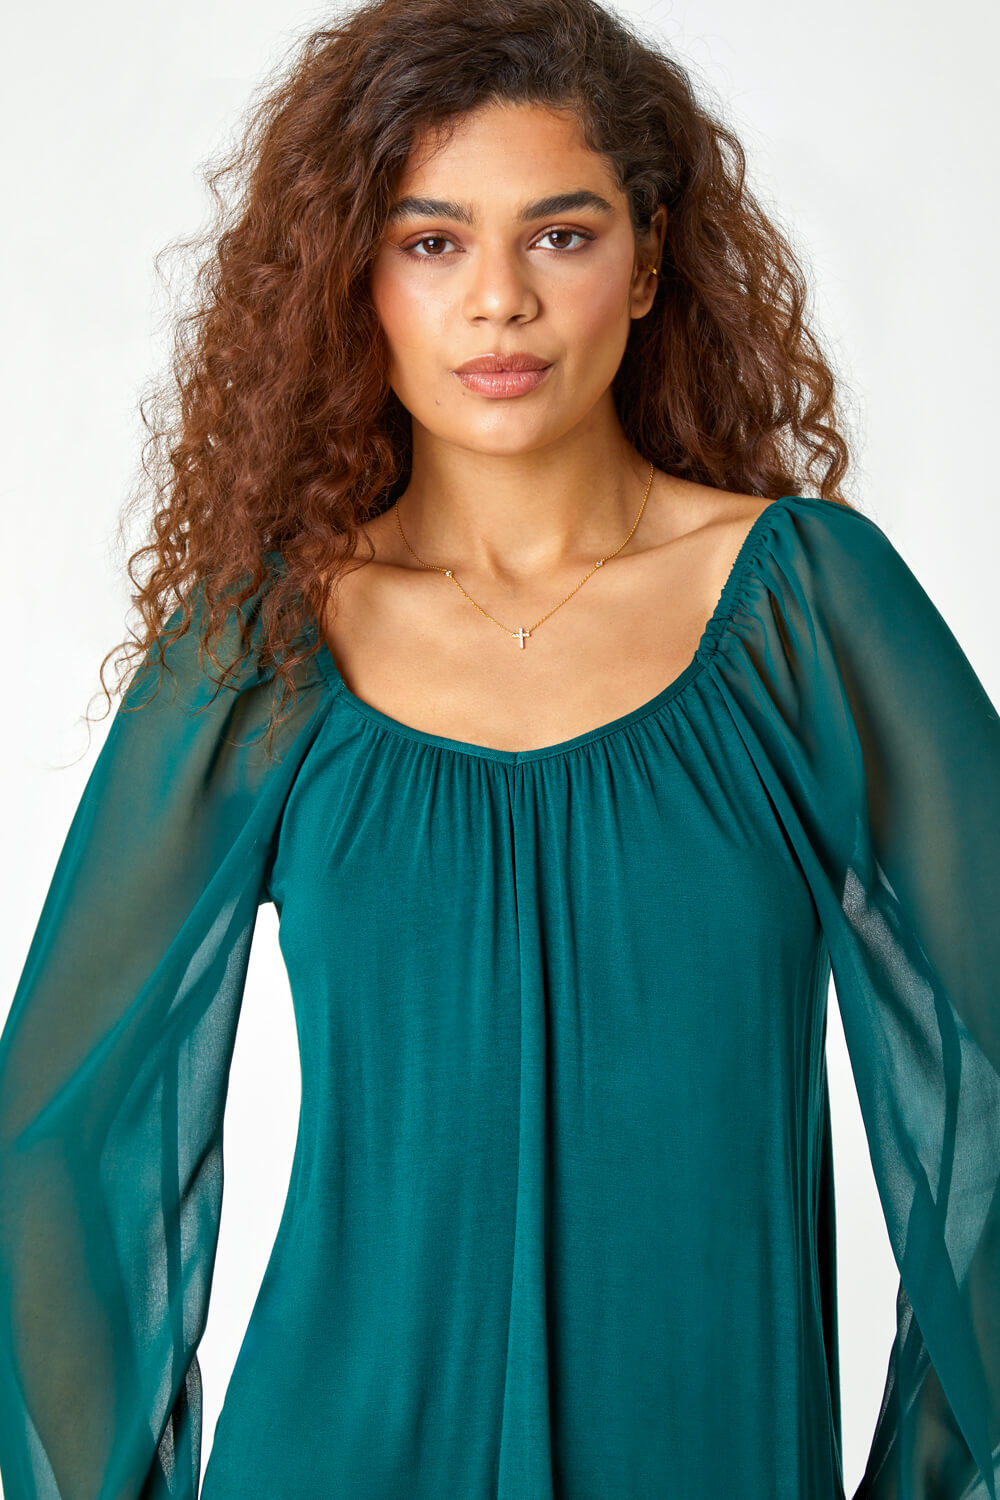 Green Contrast Chiffon Sleeve Stretch Top, Image 4 of 5